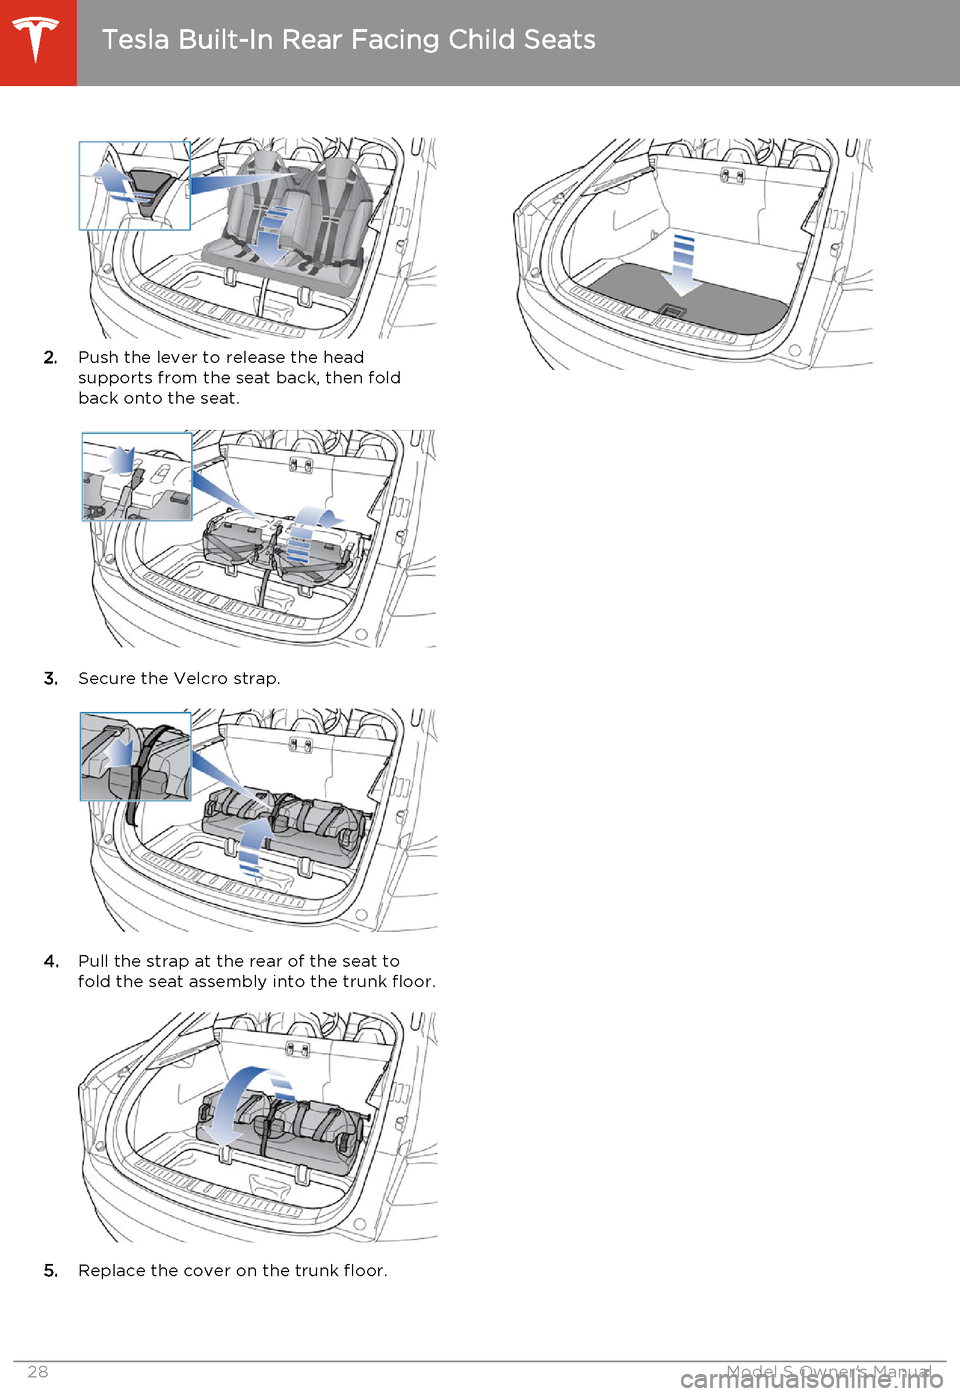 TESLA MODEL S 2014   (North America) Owners Guide 2.Push the lever to release the head
supports from the seat back, then fold
back onto the seat.
3. Secure the Velcro strap.
4.Pull the strap at the rear of the seat to
fold the seat assembly into the 